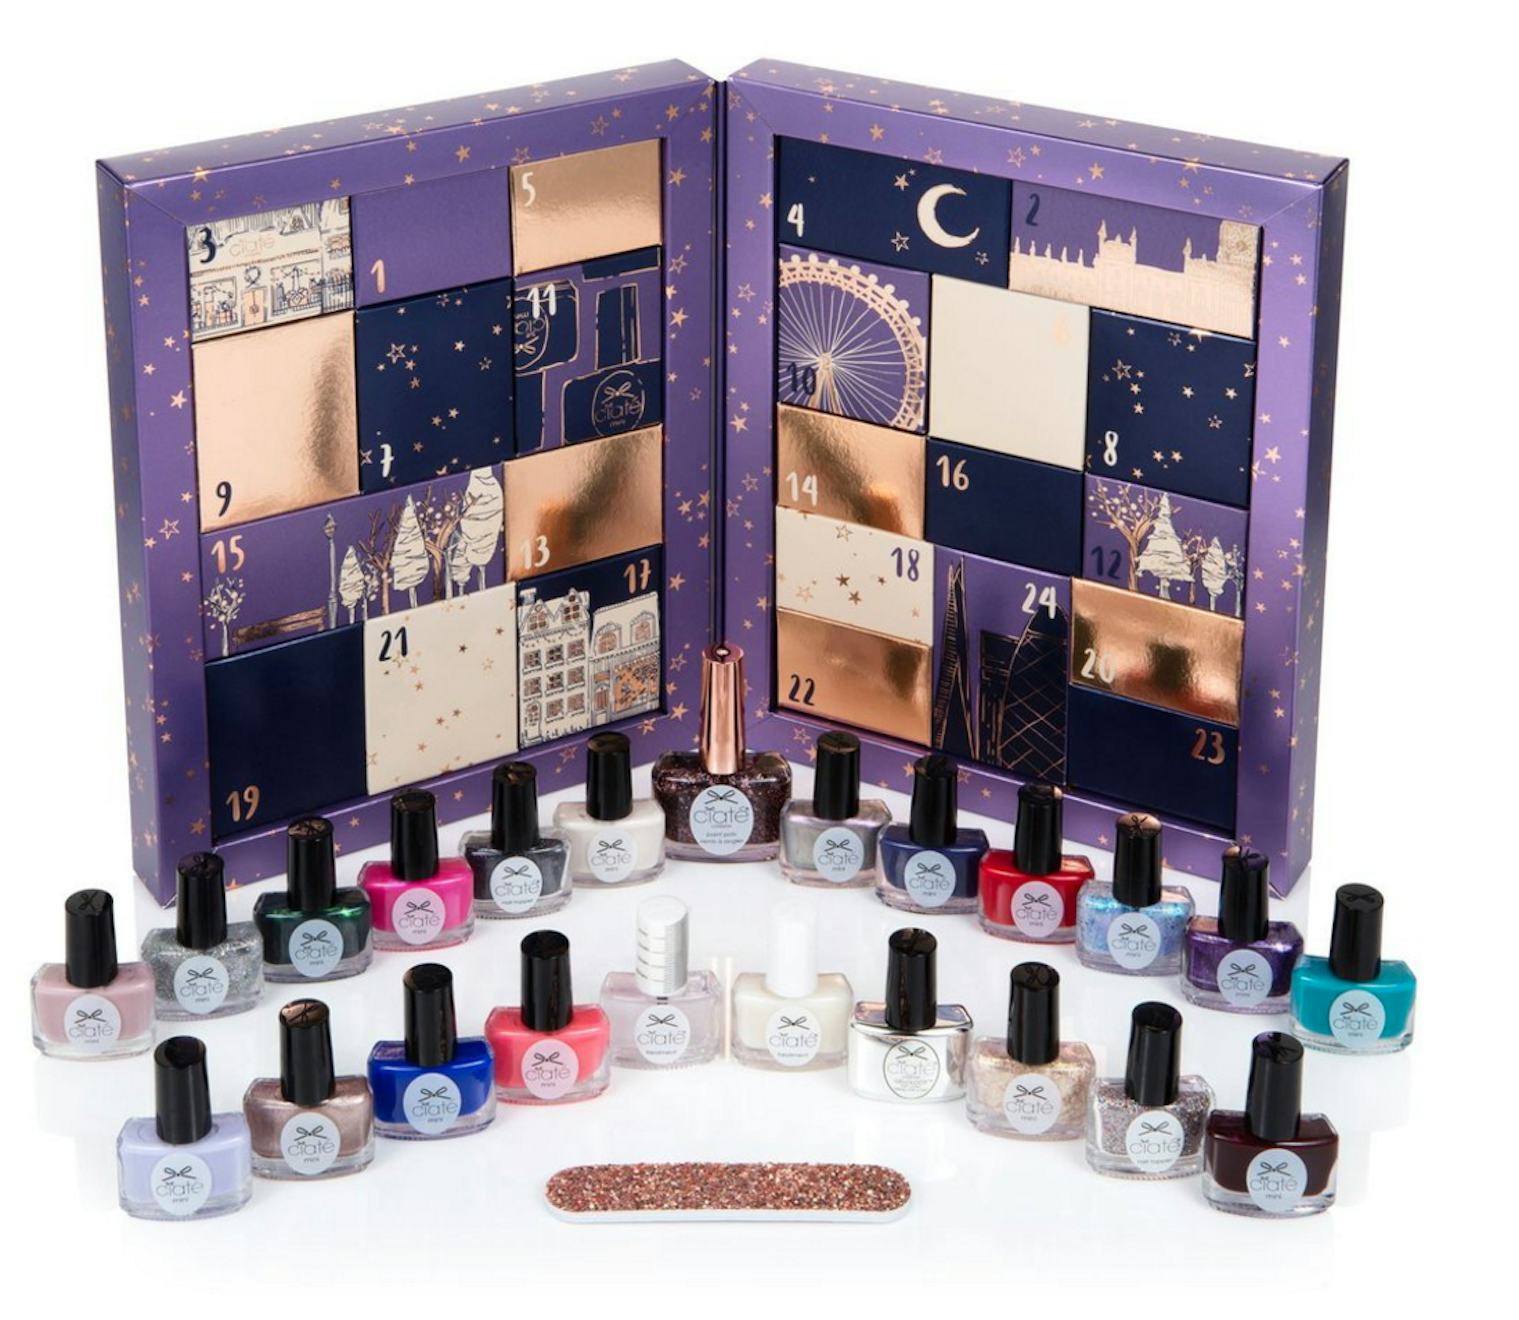 The Best 2016 Beauty Advent Calendars To Help You Count Down The Holidays